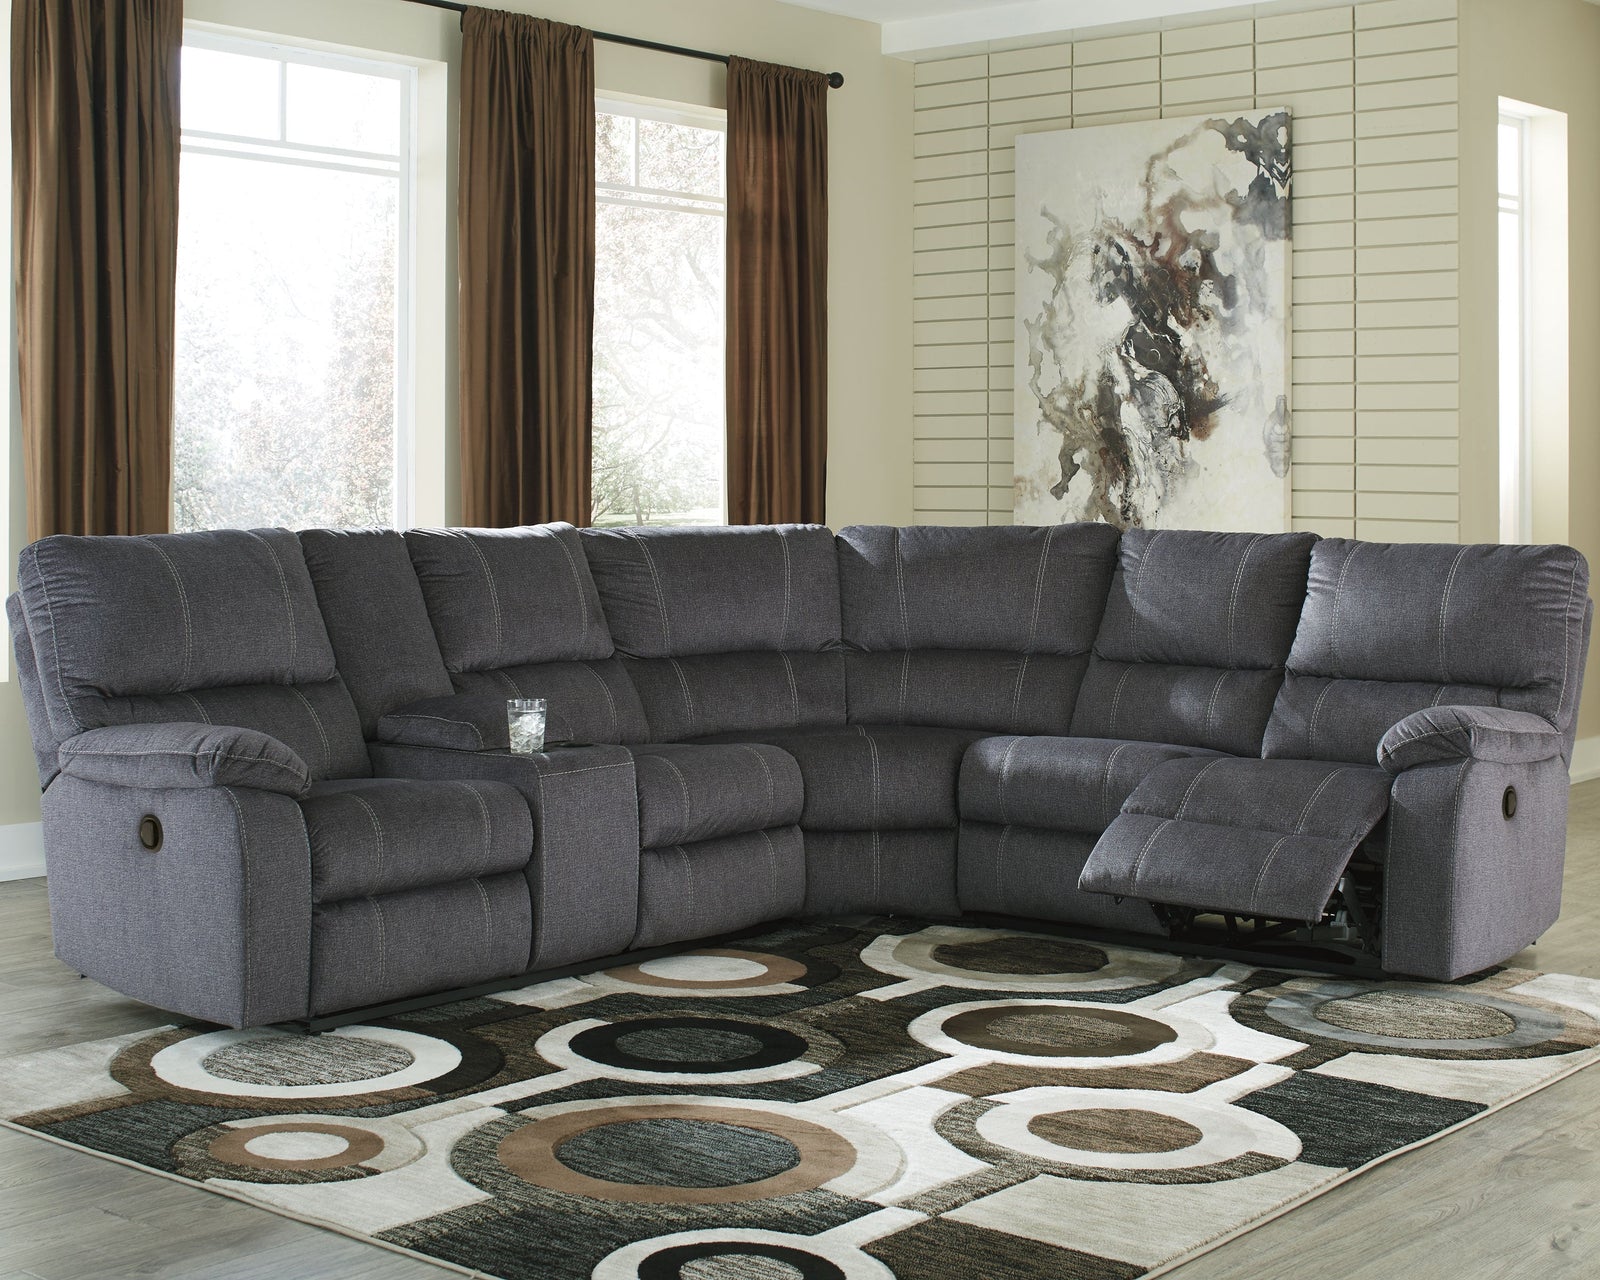 Urbino Charcoal Chenille 3-Piece Reclining Sectional